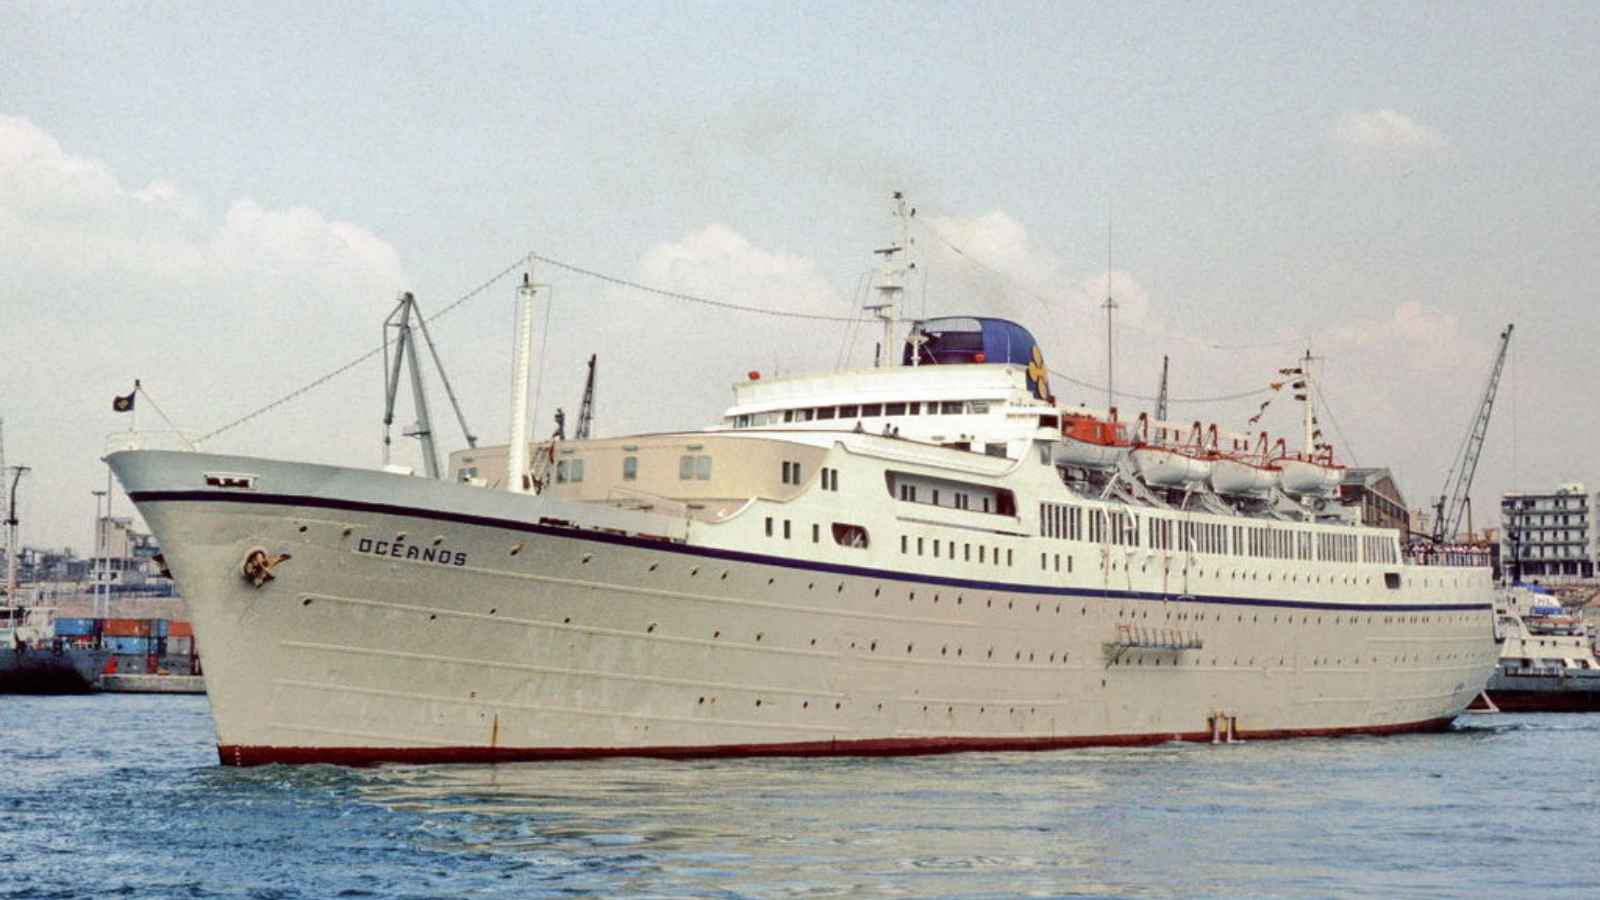 <p>In August 1991, the Greek cruise ship Oceanos began taking on water and eventually sank off the coast of South Africa. All passengers were successfully evacuated, but this disaster highlighted the negligence and lack of training by the crew.</p><p>The crew members were not properly trained to handle emergencies, resulting in chaos and confusion during the evacuation process. This lack of preparation led to delays in alerting passengers and executing a timely evacuation. Despite encountering rough seas and high winds, the captain did not follow standard <a href="https://savvyolu.com/dangerous-beaches-in-the-world/">safety protocols</a> such as securing watertight doors and properly informing the passengers of the situation. This ultimately led to the ship sinking faster than expected.</p>